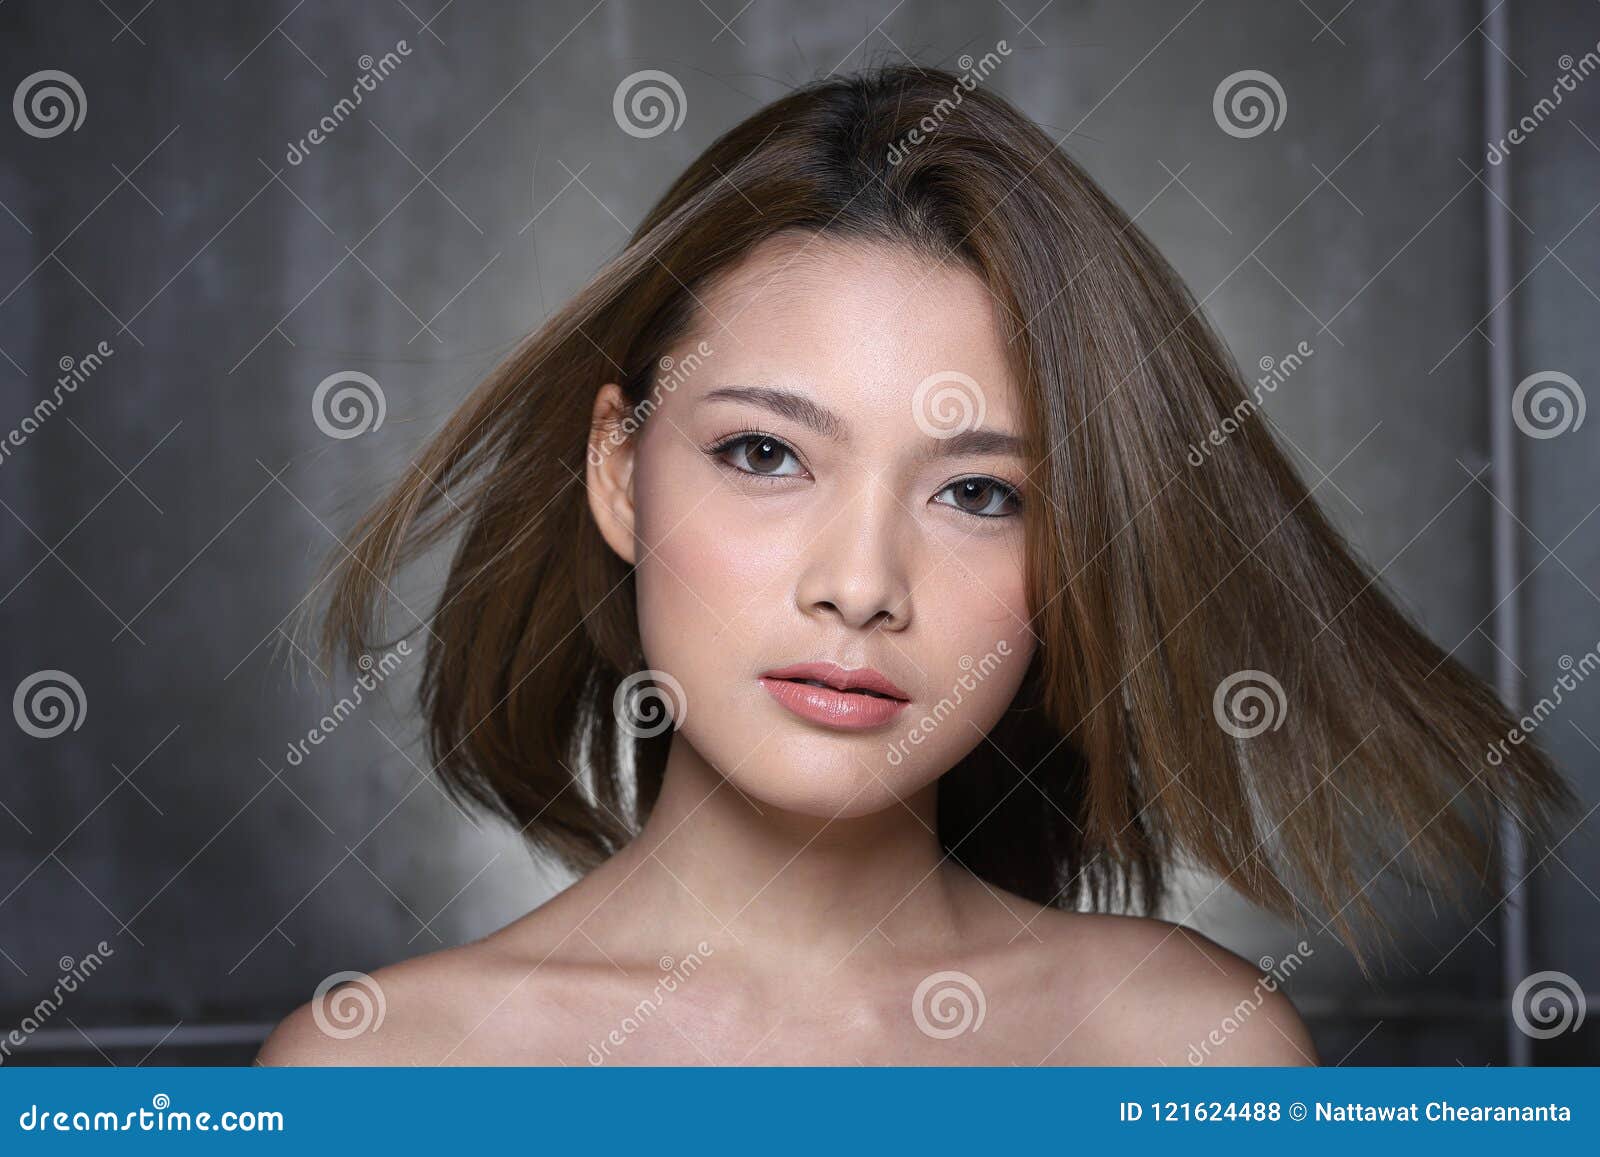 Fashion Asian Woman With Update Style And Make Up Hairstyle Stock Photo Image Of Casual Fashion 121624488